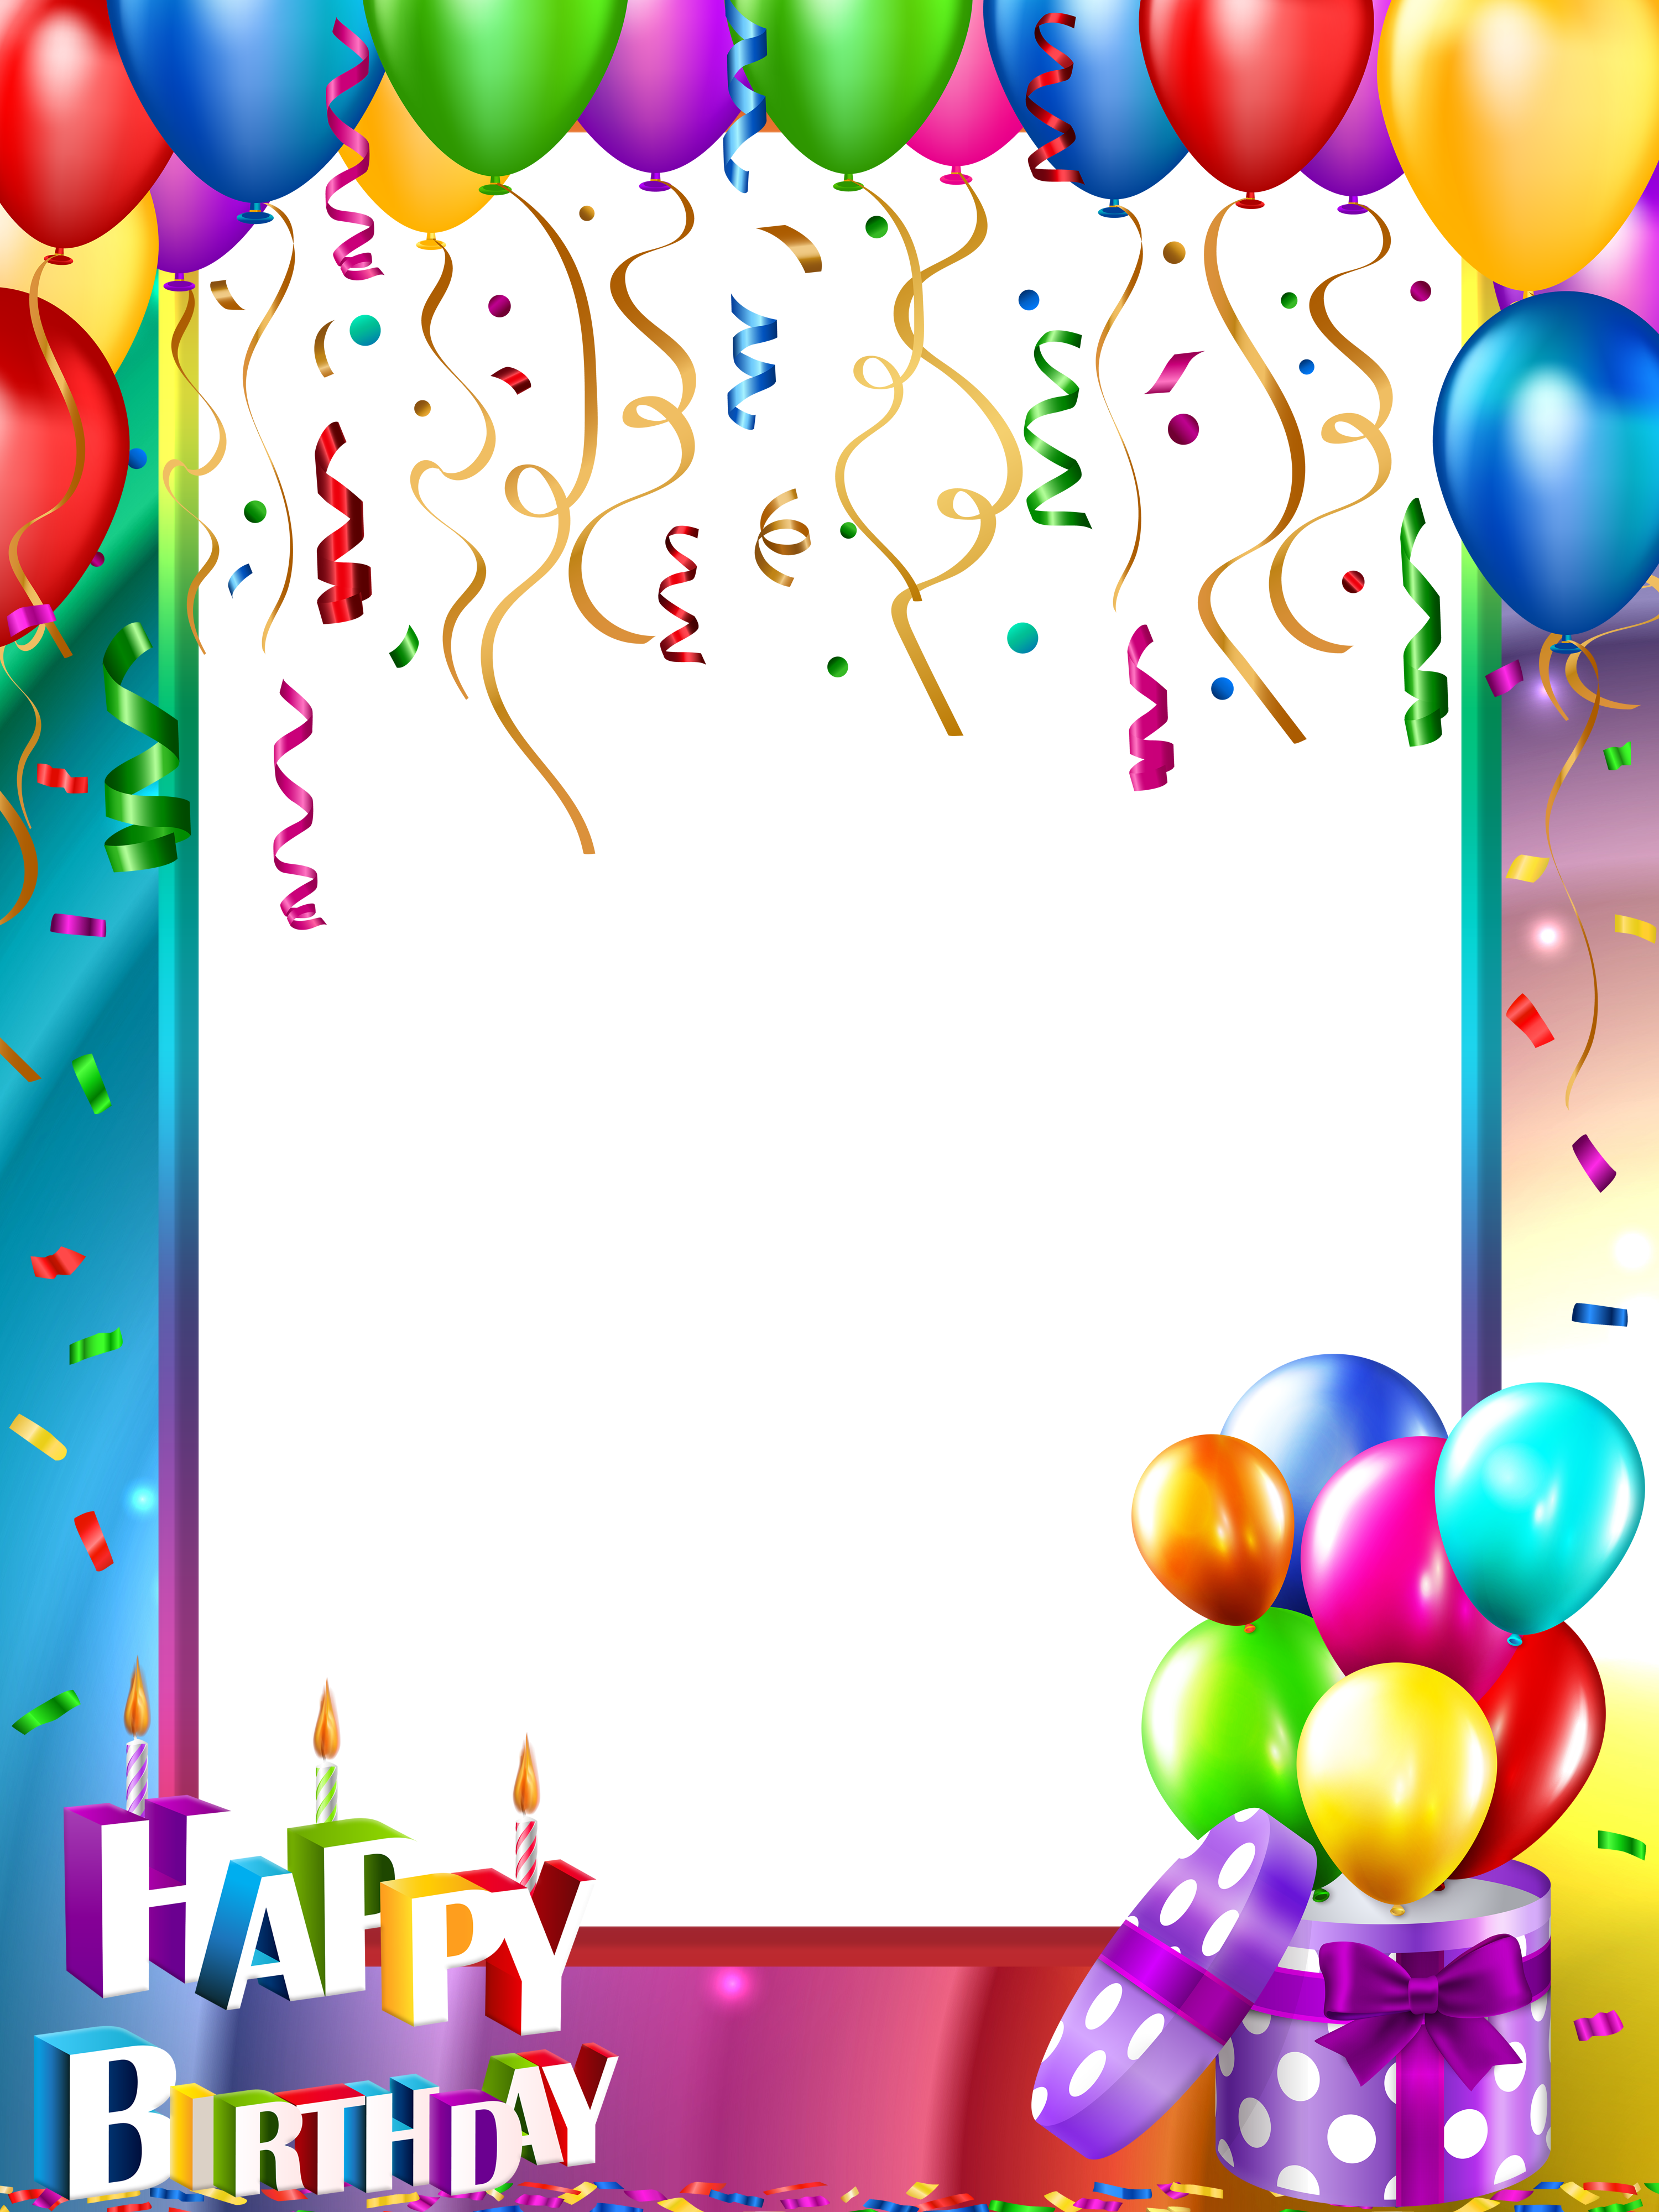 Photos Frame Birthday Download HD PNG Image